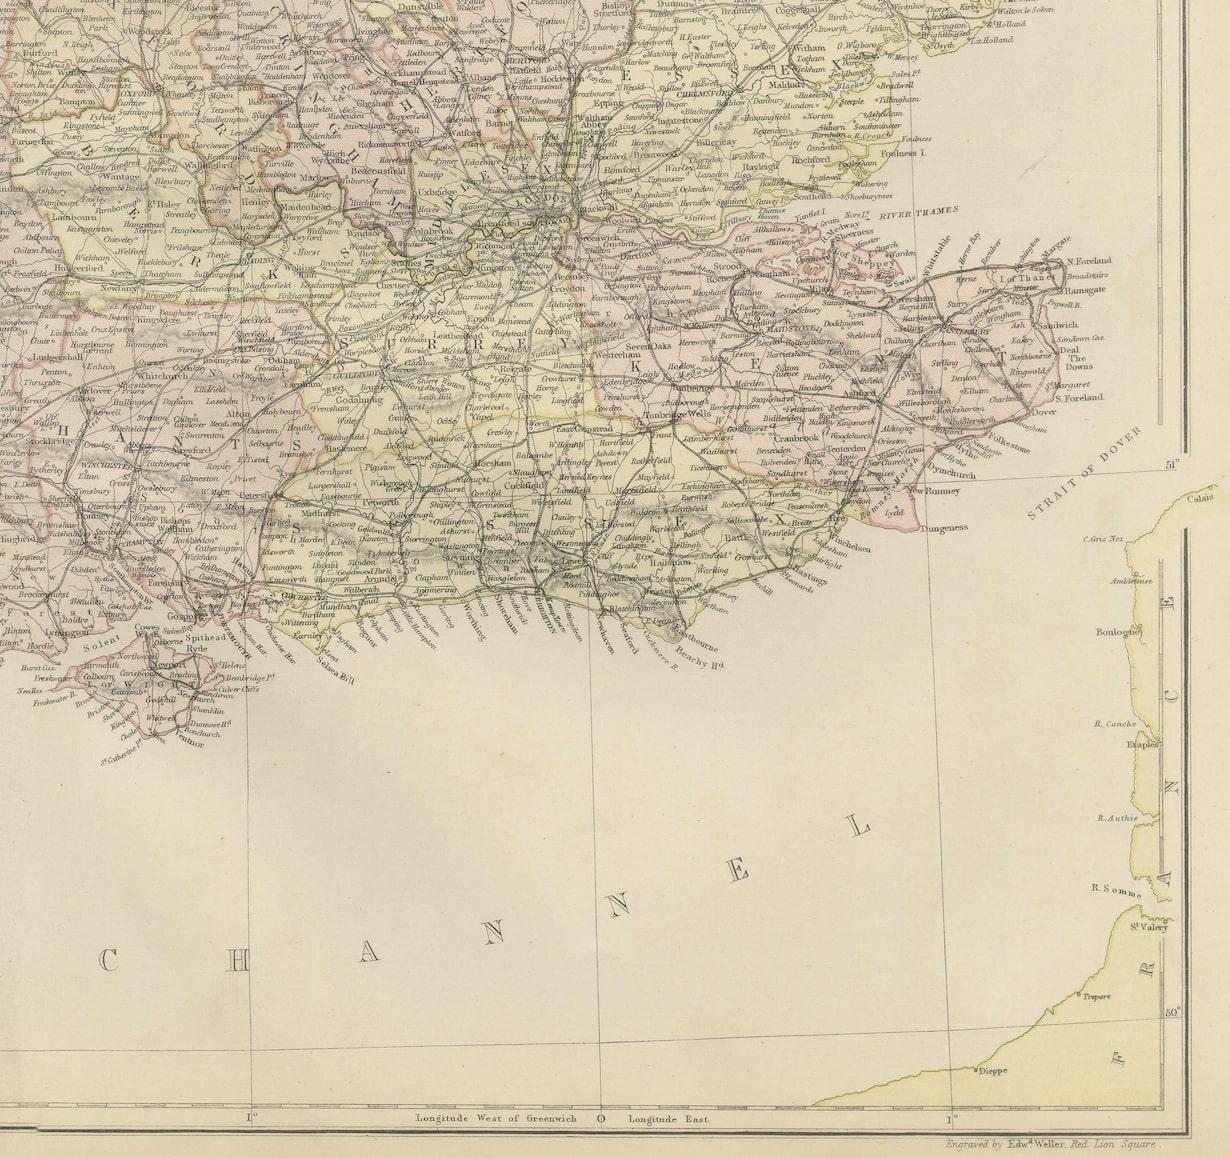 Embark on a Journey Through the Southern Part of 'England and Wales' with this Exquisite Antique Map! This map provides a vivid portrayal of the captivating landscapes and cultural heritage of the southern regions of England and Wales and includes a